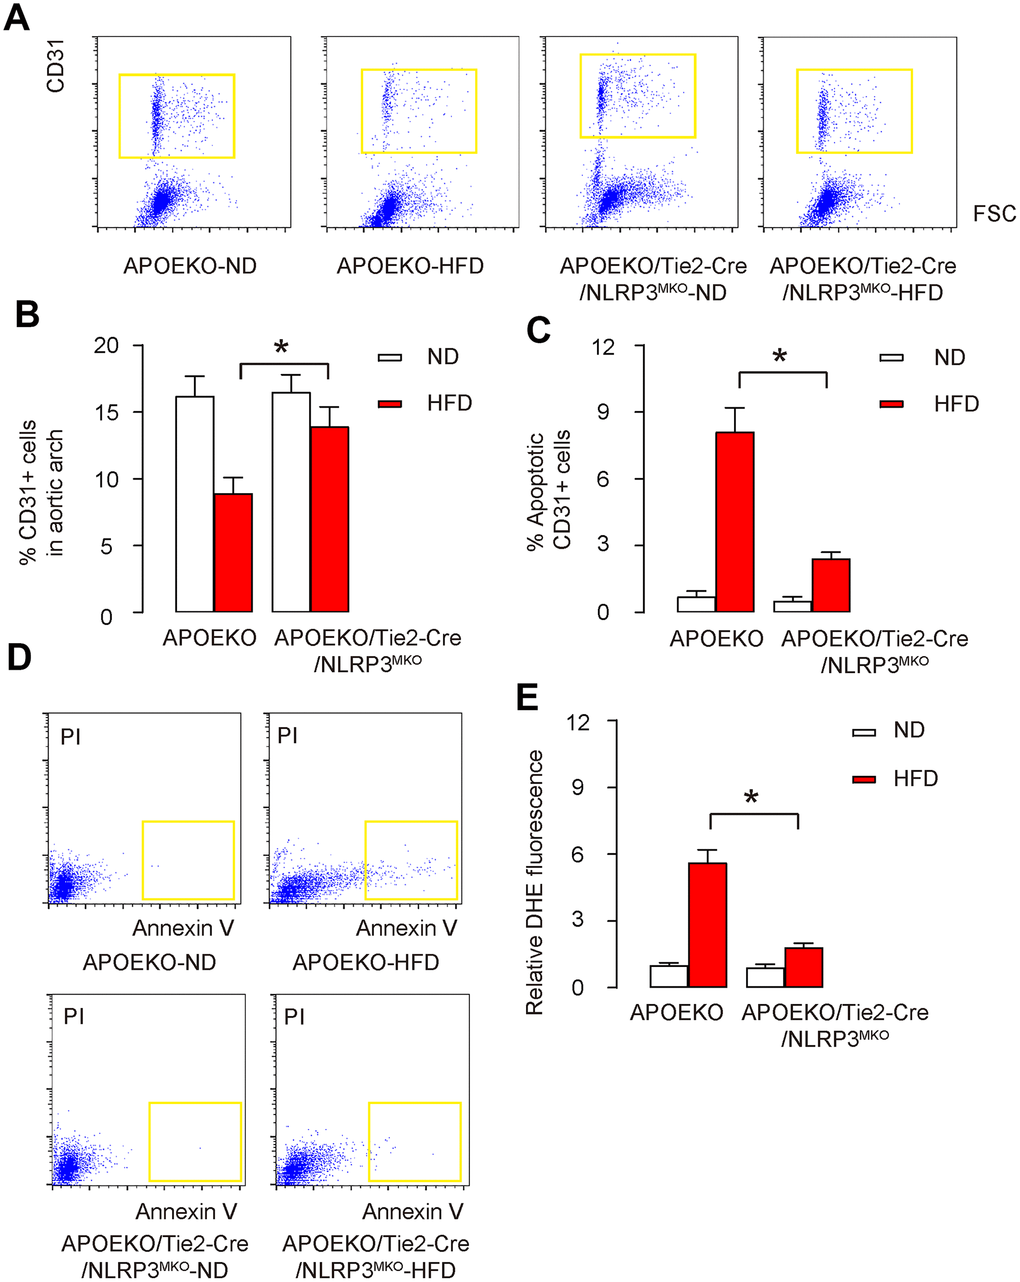 Endothelial cell apoptosis and ROS production are attenuated in HFD-treated endothelia-specific NLRP3 knockout mice. (A, B) CD31+ cells were isolated from the dissociated mouse aortic arch by flow cytometry, shown by representative flow charts (A), and by quantification (B). (C, D) The apoptosis of isolated CD31+ cells were analyzed by FITC Annexin V Apoptosis assay, shown by quantification (C), and by representative flow charts (D). (E) DHE assay for ROS. *p